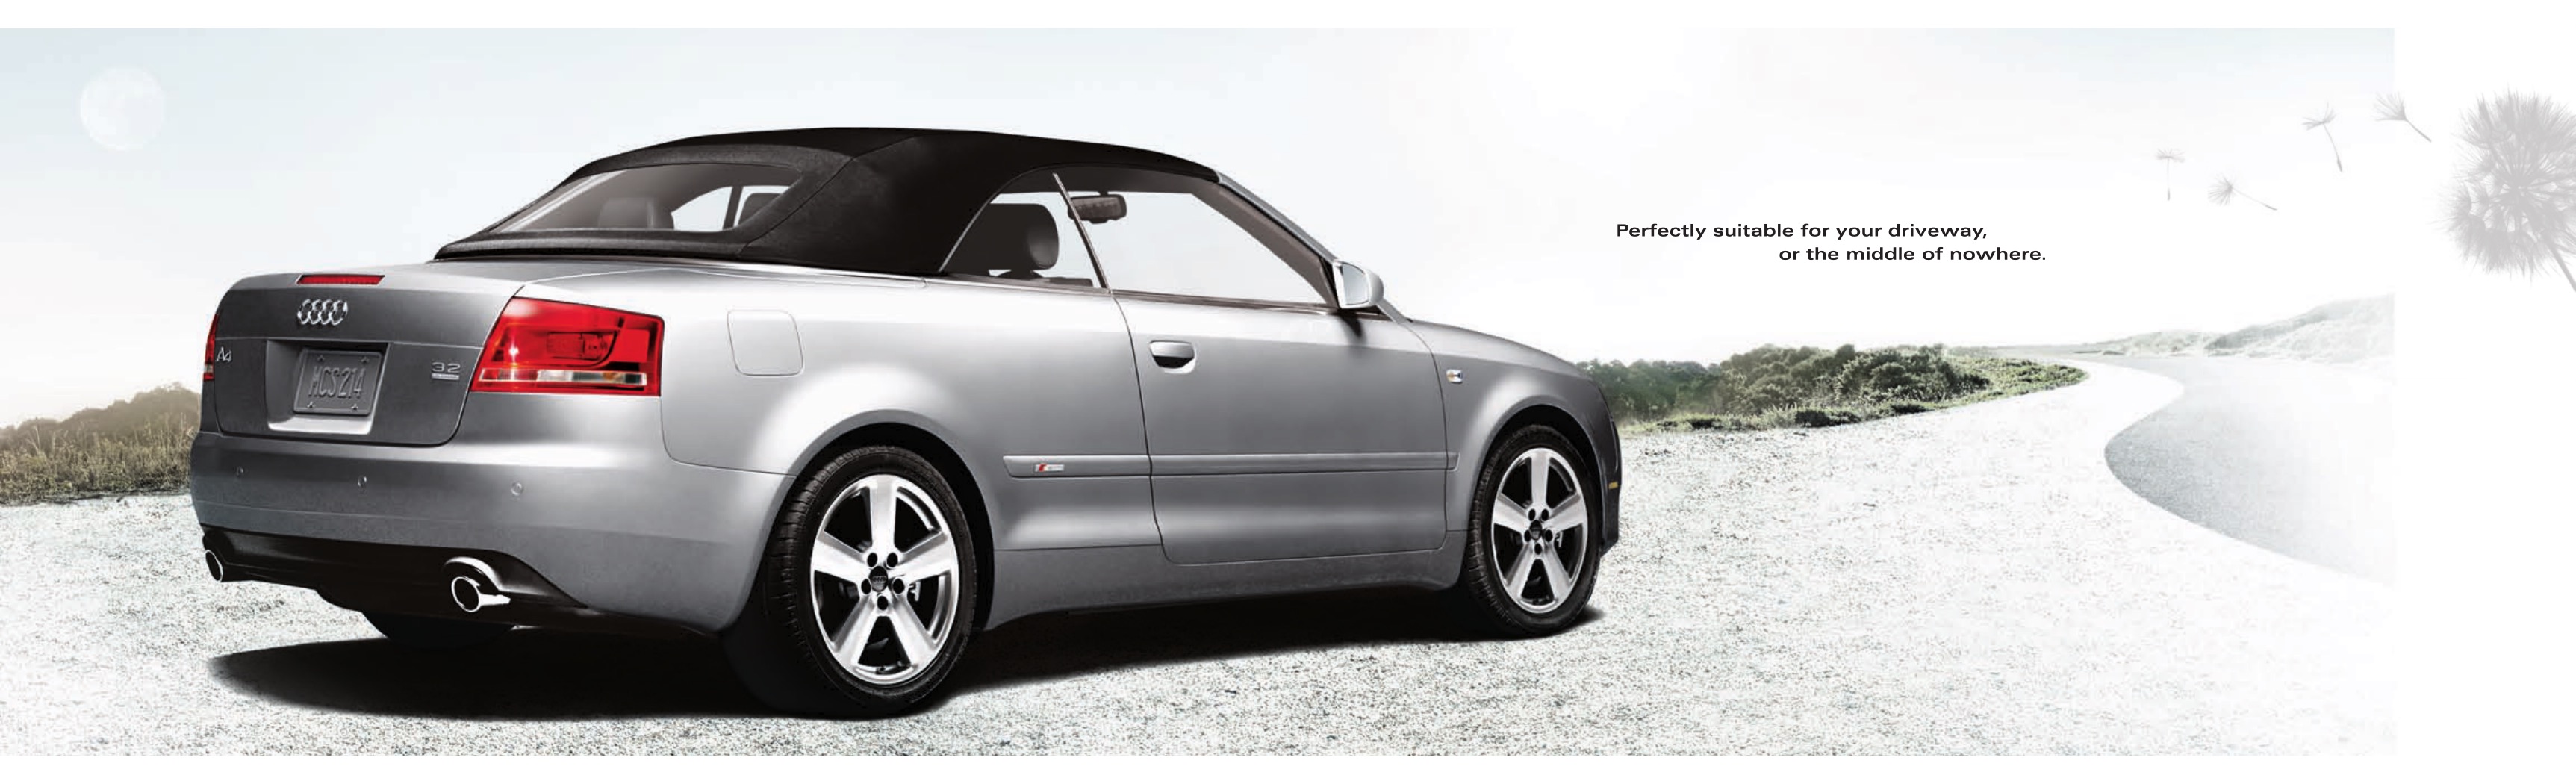 2009 Audi A4 Convertible Brochure Page 9